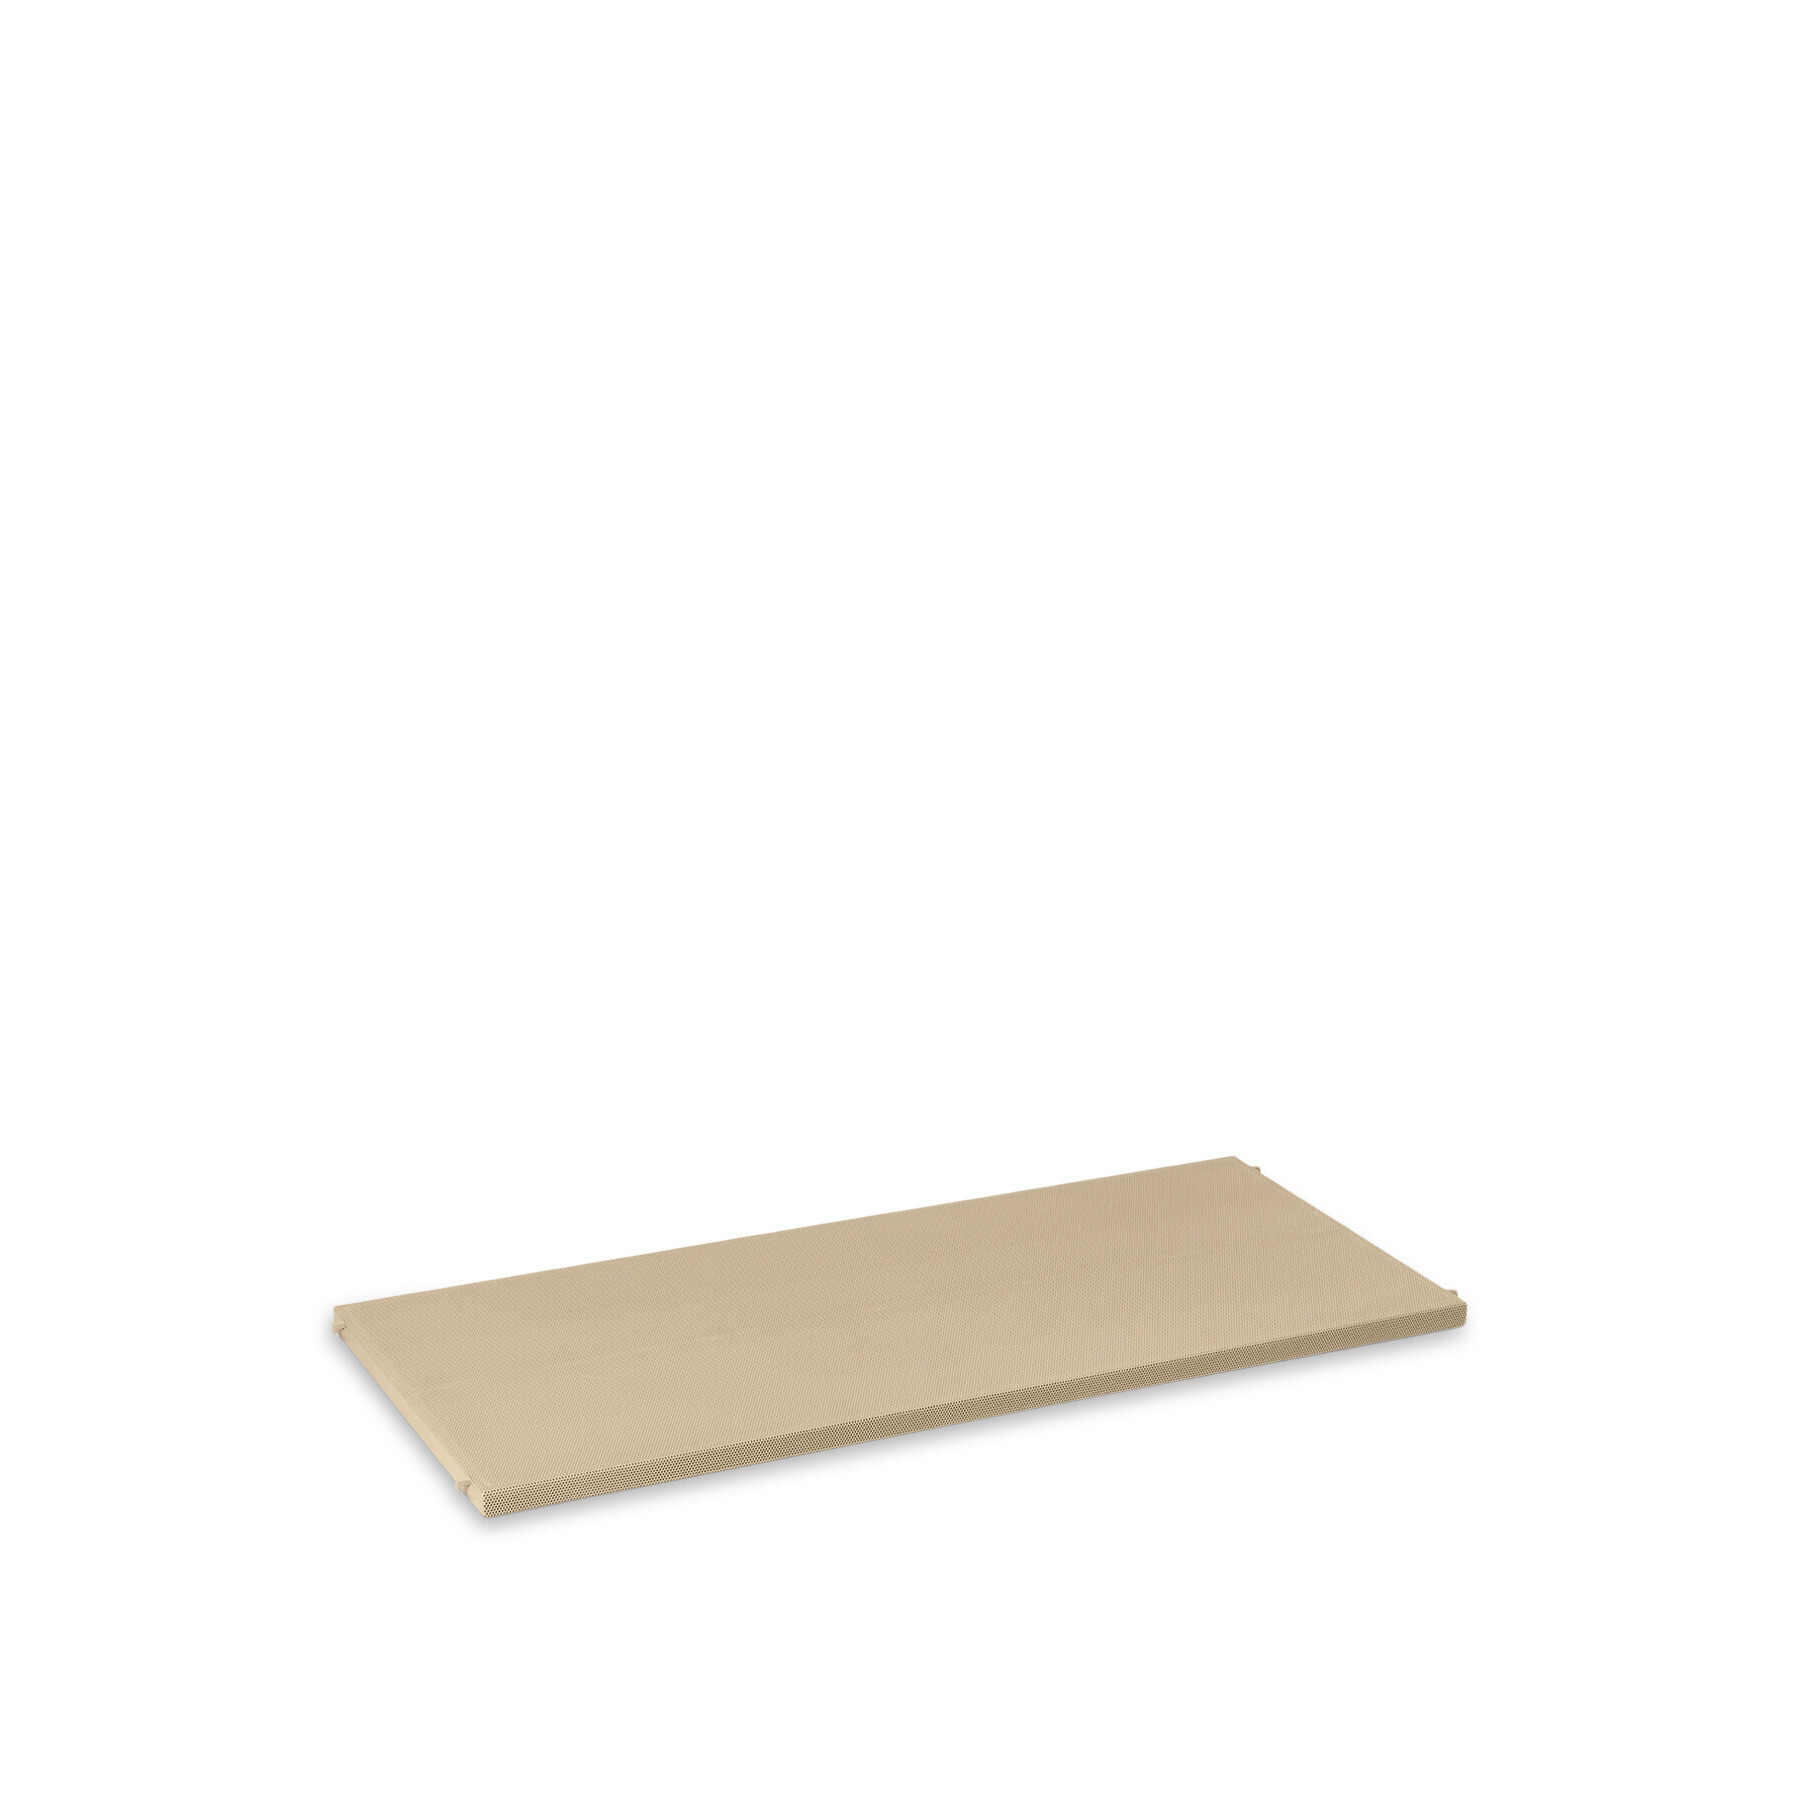 Ferm living Punctual - Perforated Metal Shelf-Cashmere Beige - image 1